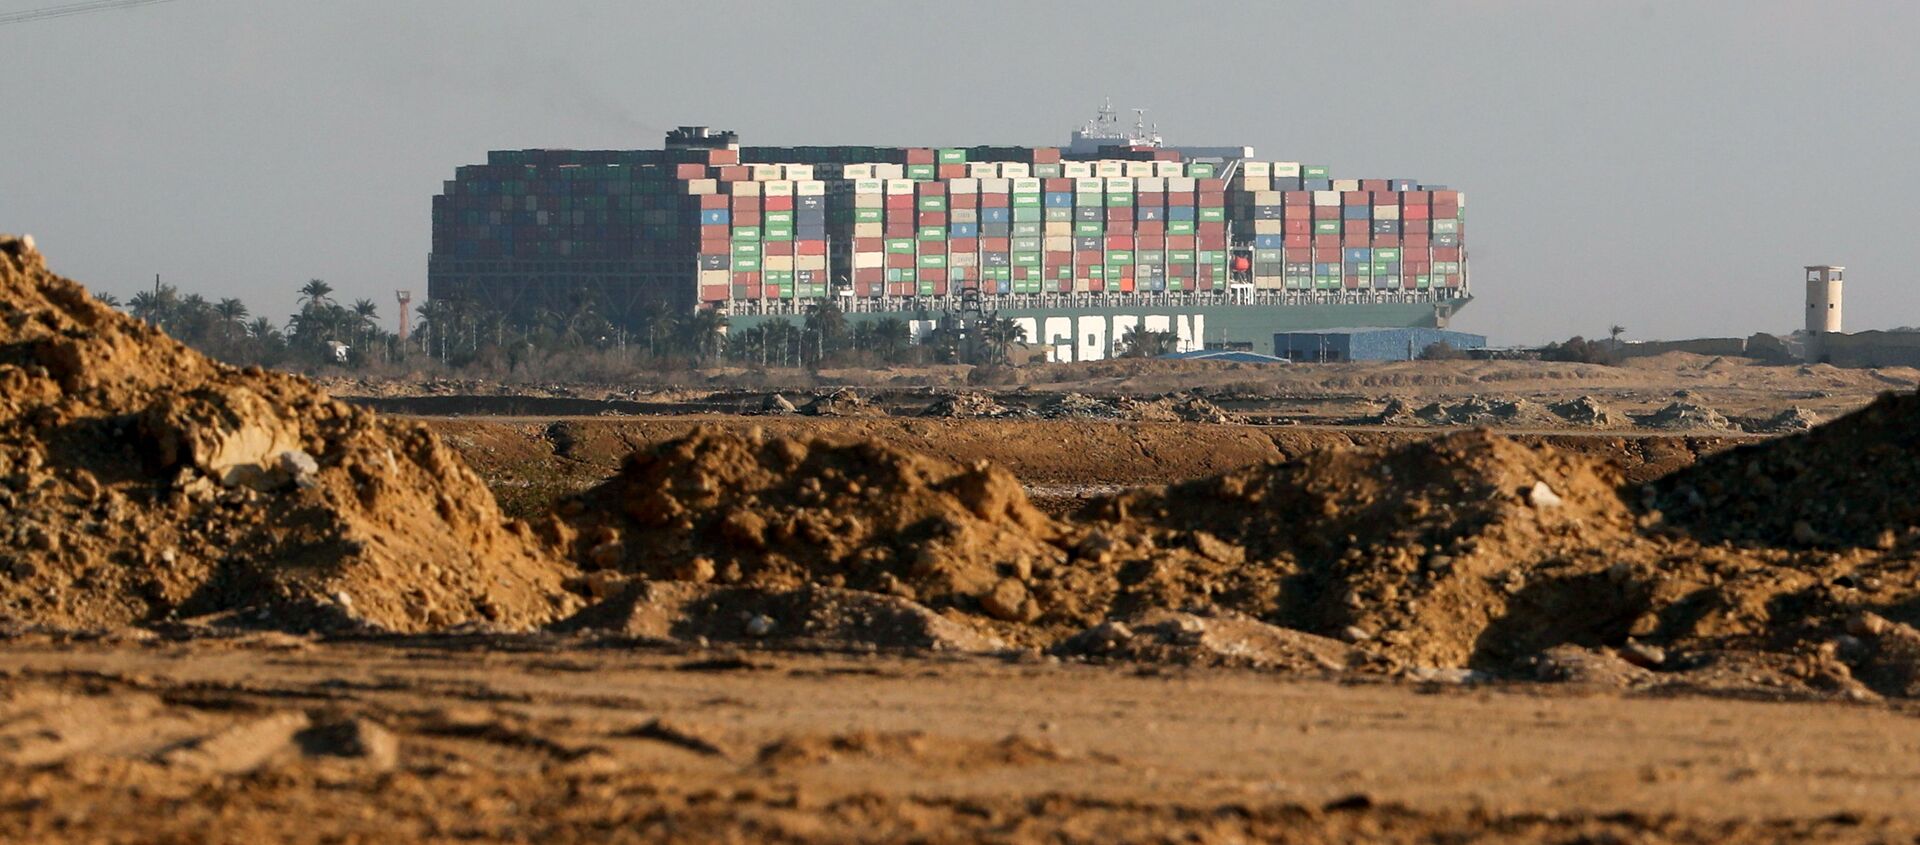 Stranded container ship Ever Given, one of the world's largest container ships, is seen after it ran aground, in Suez Canal, Egypt March 26, 2021 - Sputnik International, 1920, 26.03.2021